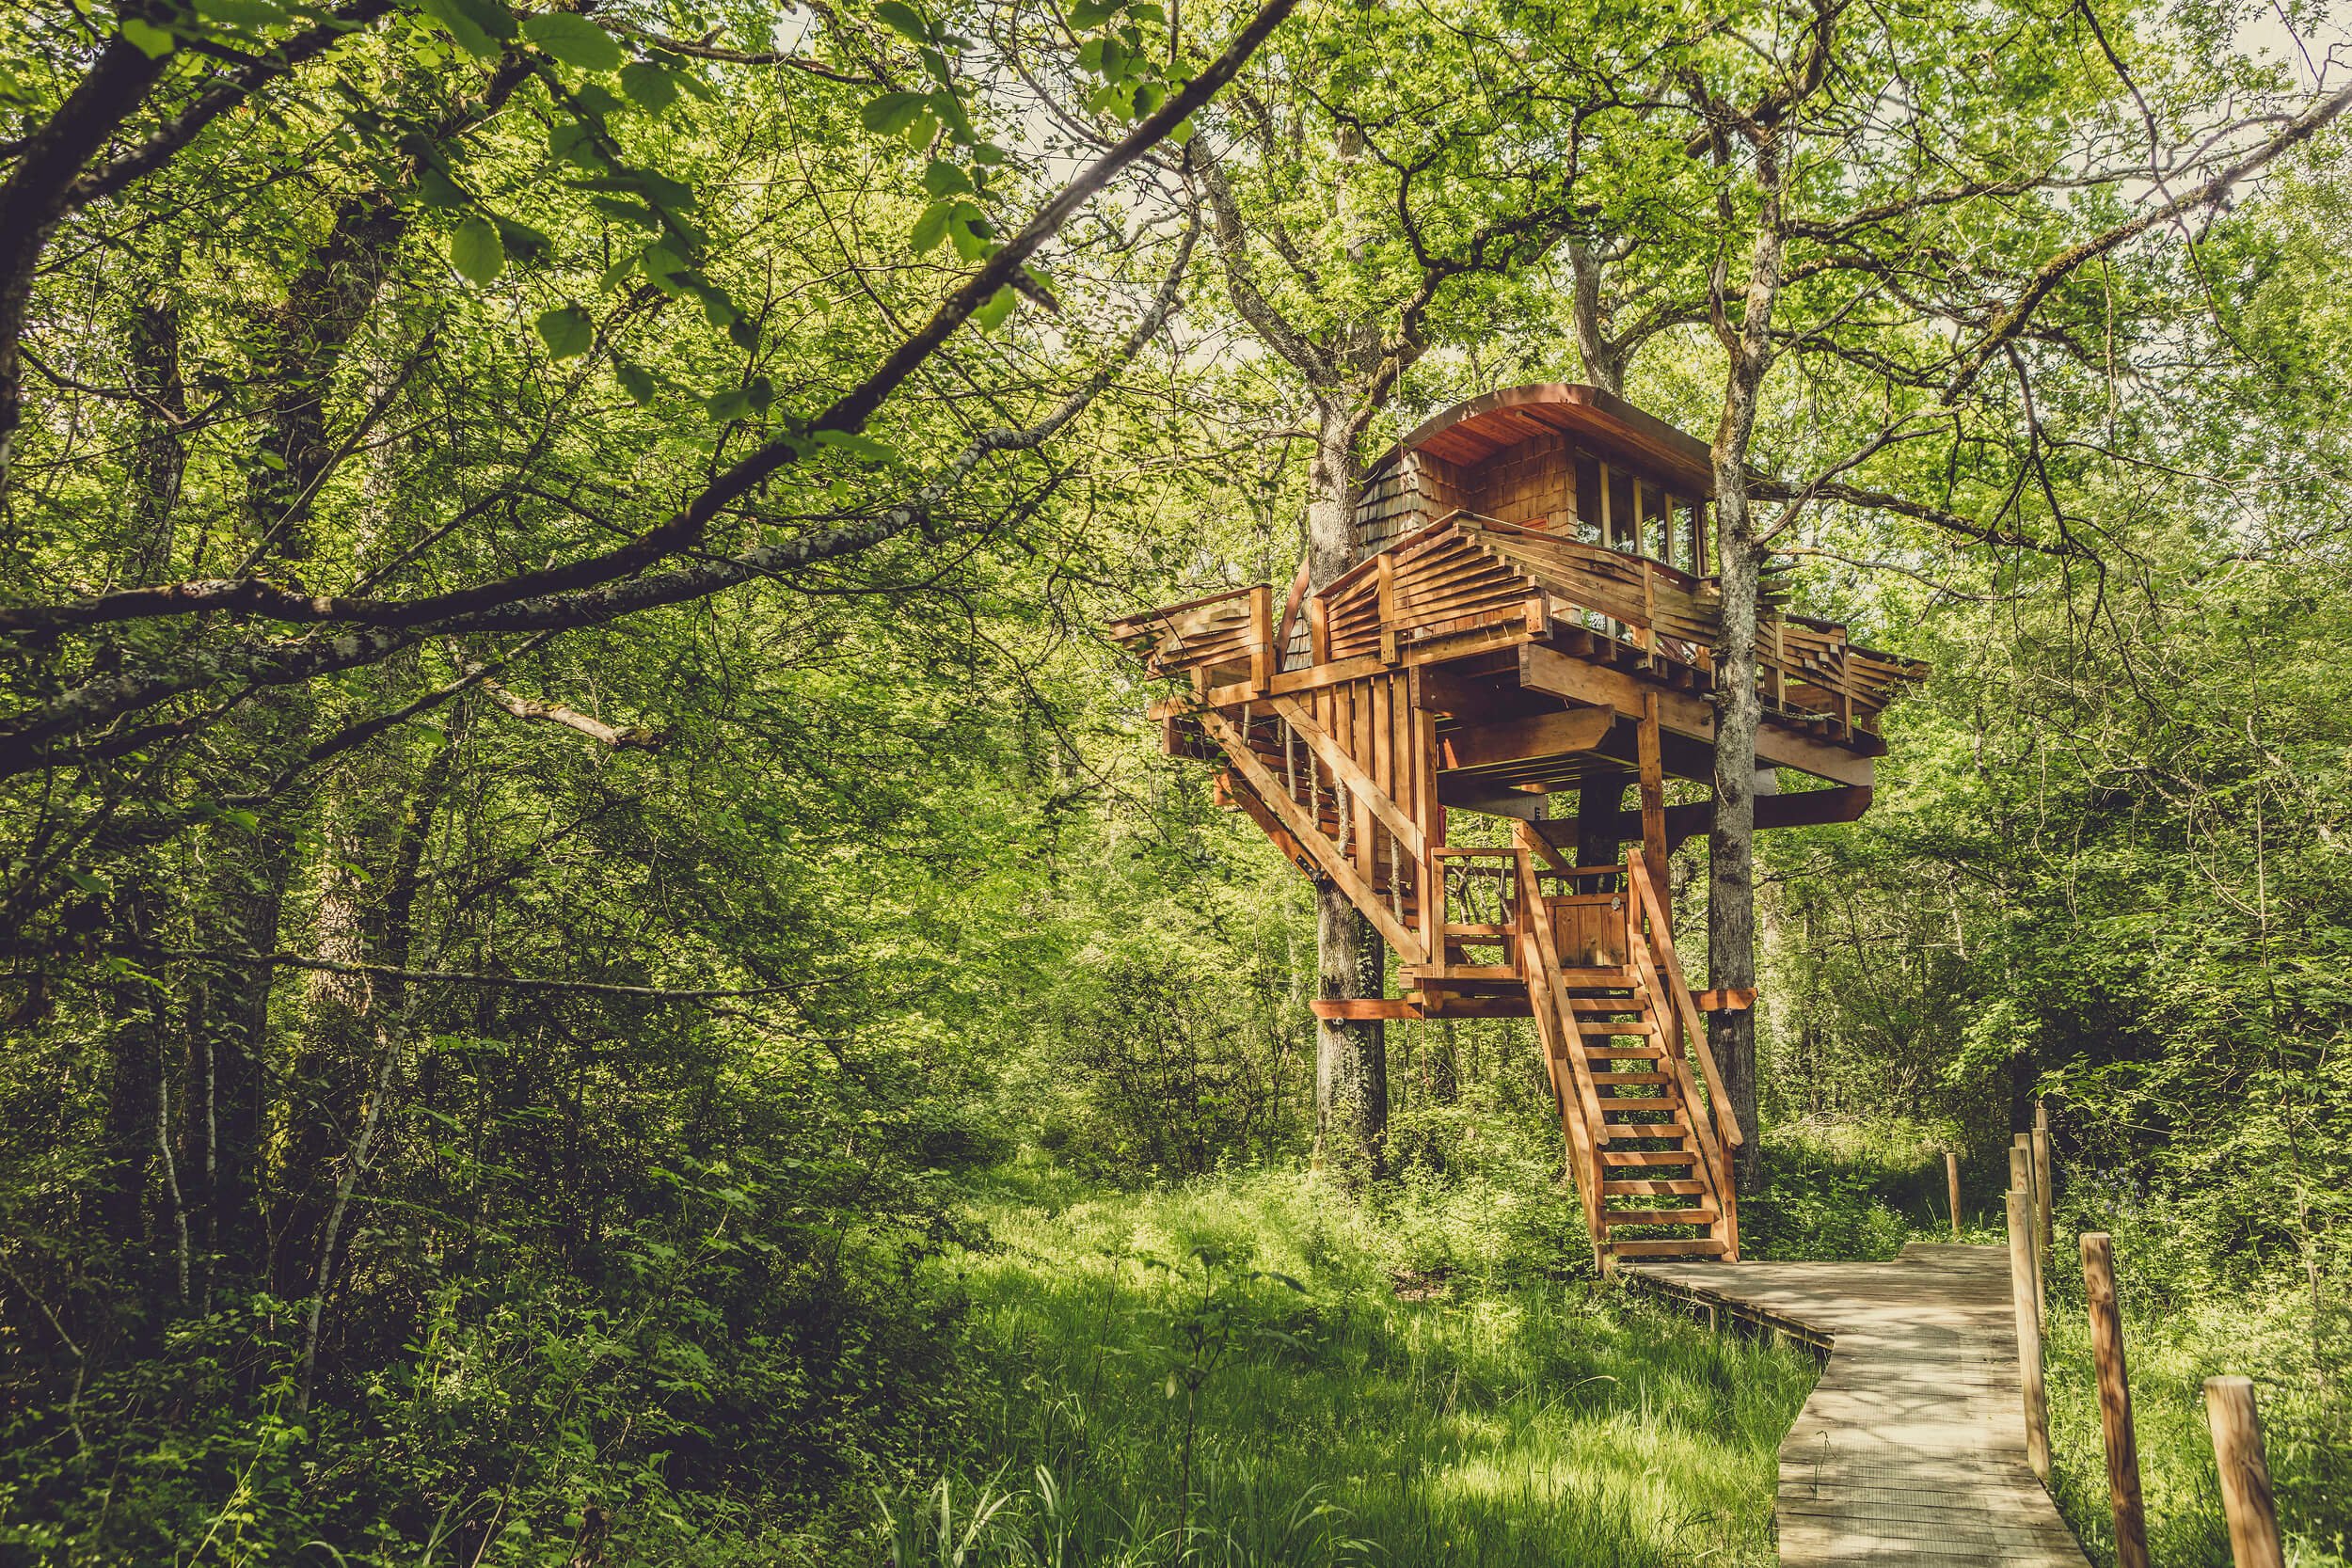 Escape to the forest- a look inside Basoa Suites' treehouses by MuruStudios advertising photographers in Madrid Barcelona Pamplona Spain 39.jpg